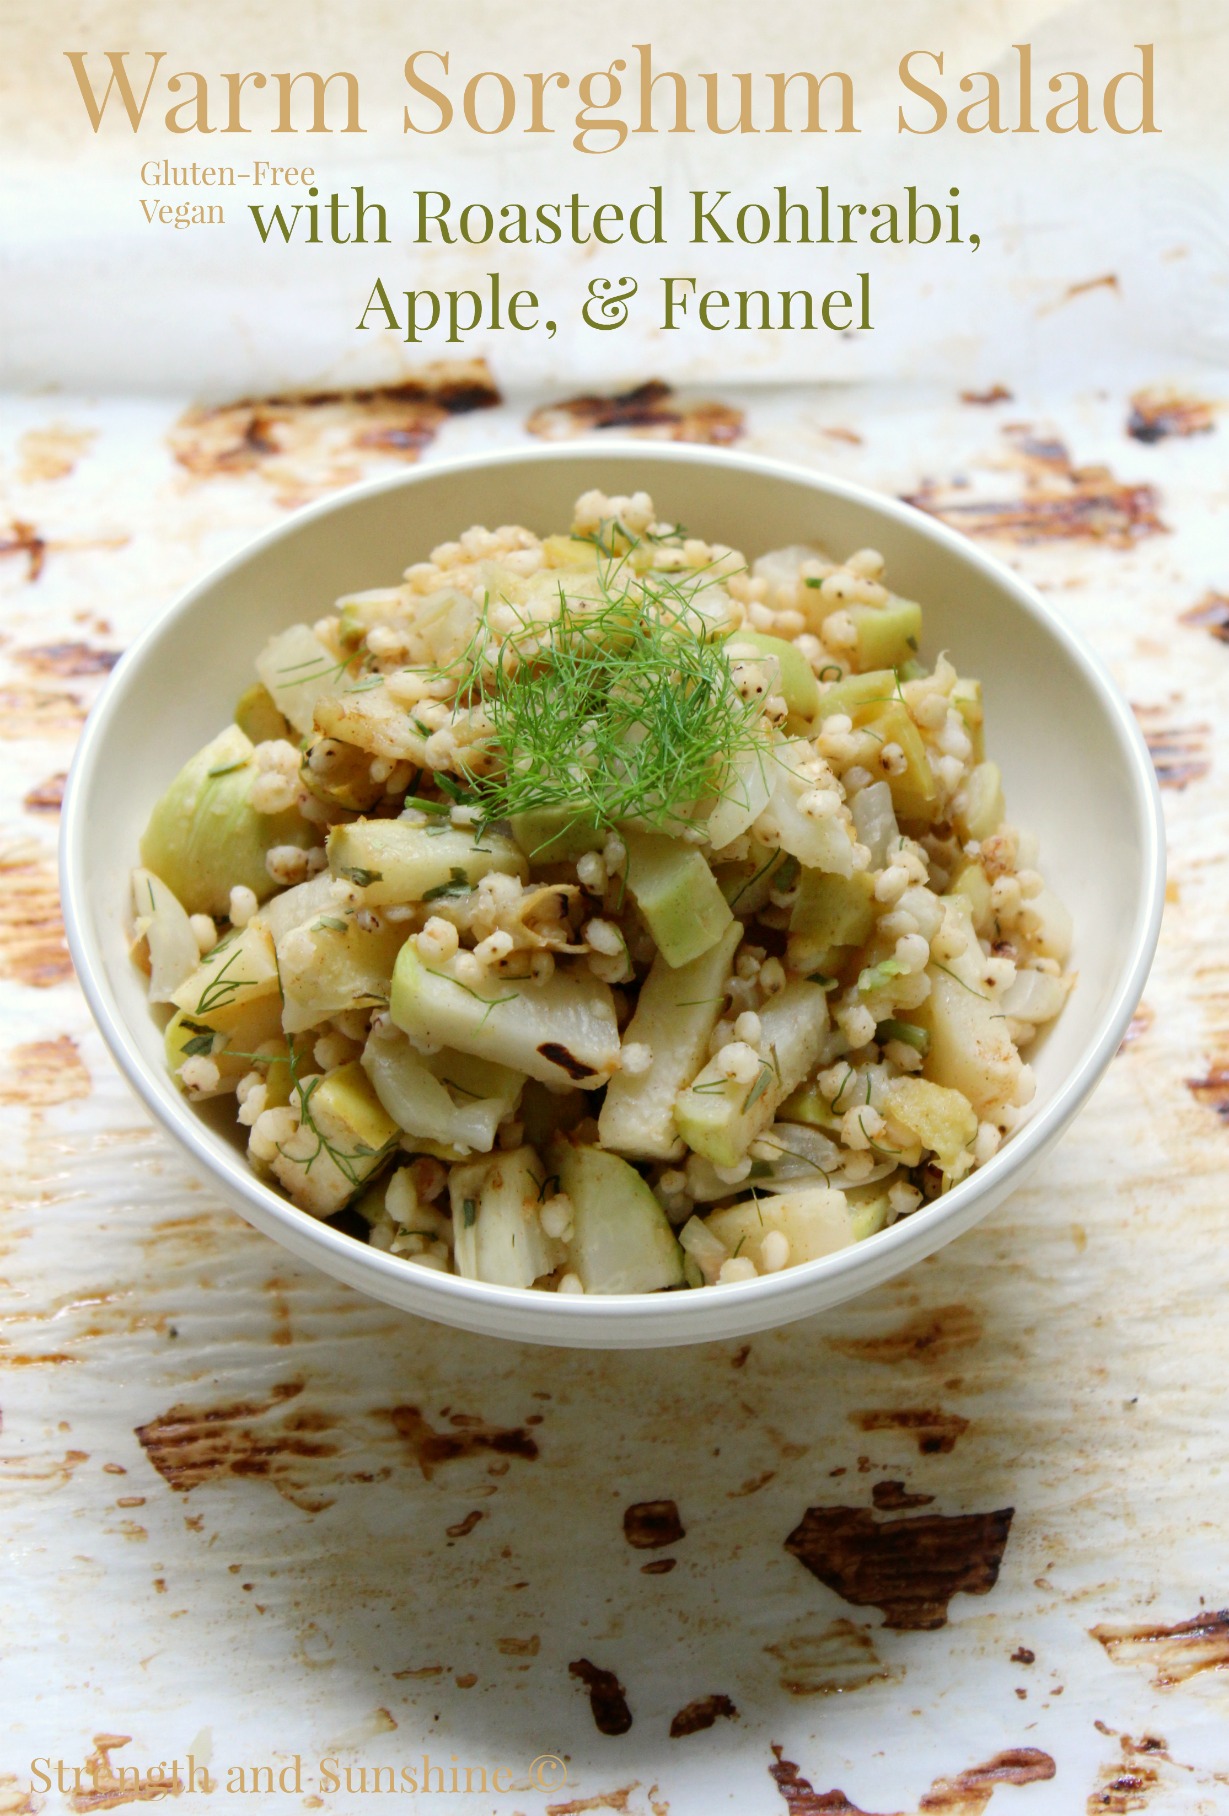 Warm Sorghum Salad with Roasted Kohlrabi, Apple, & Fennel | Strength and Sunshine @RebeccaGF666 A warm sorghum salad paired with roasted kohlrabi, ginger gold apple, and fennel. This gluten-free vegan recipe is slightly sweet, comforting, and nourishing for the cold months ahead. A perfect healthy whole grain side dish.